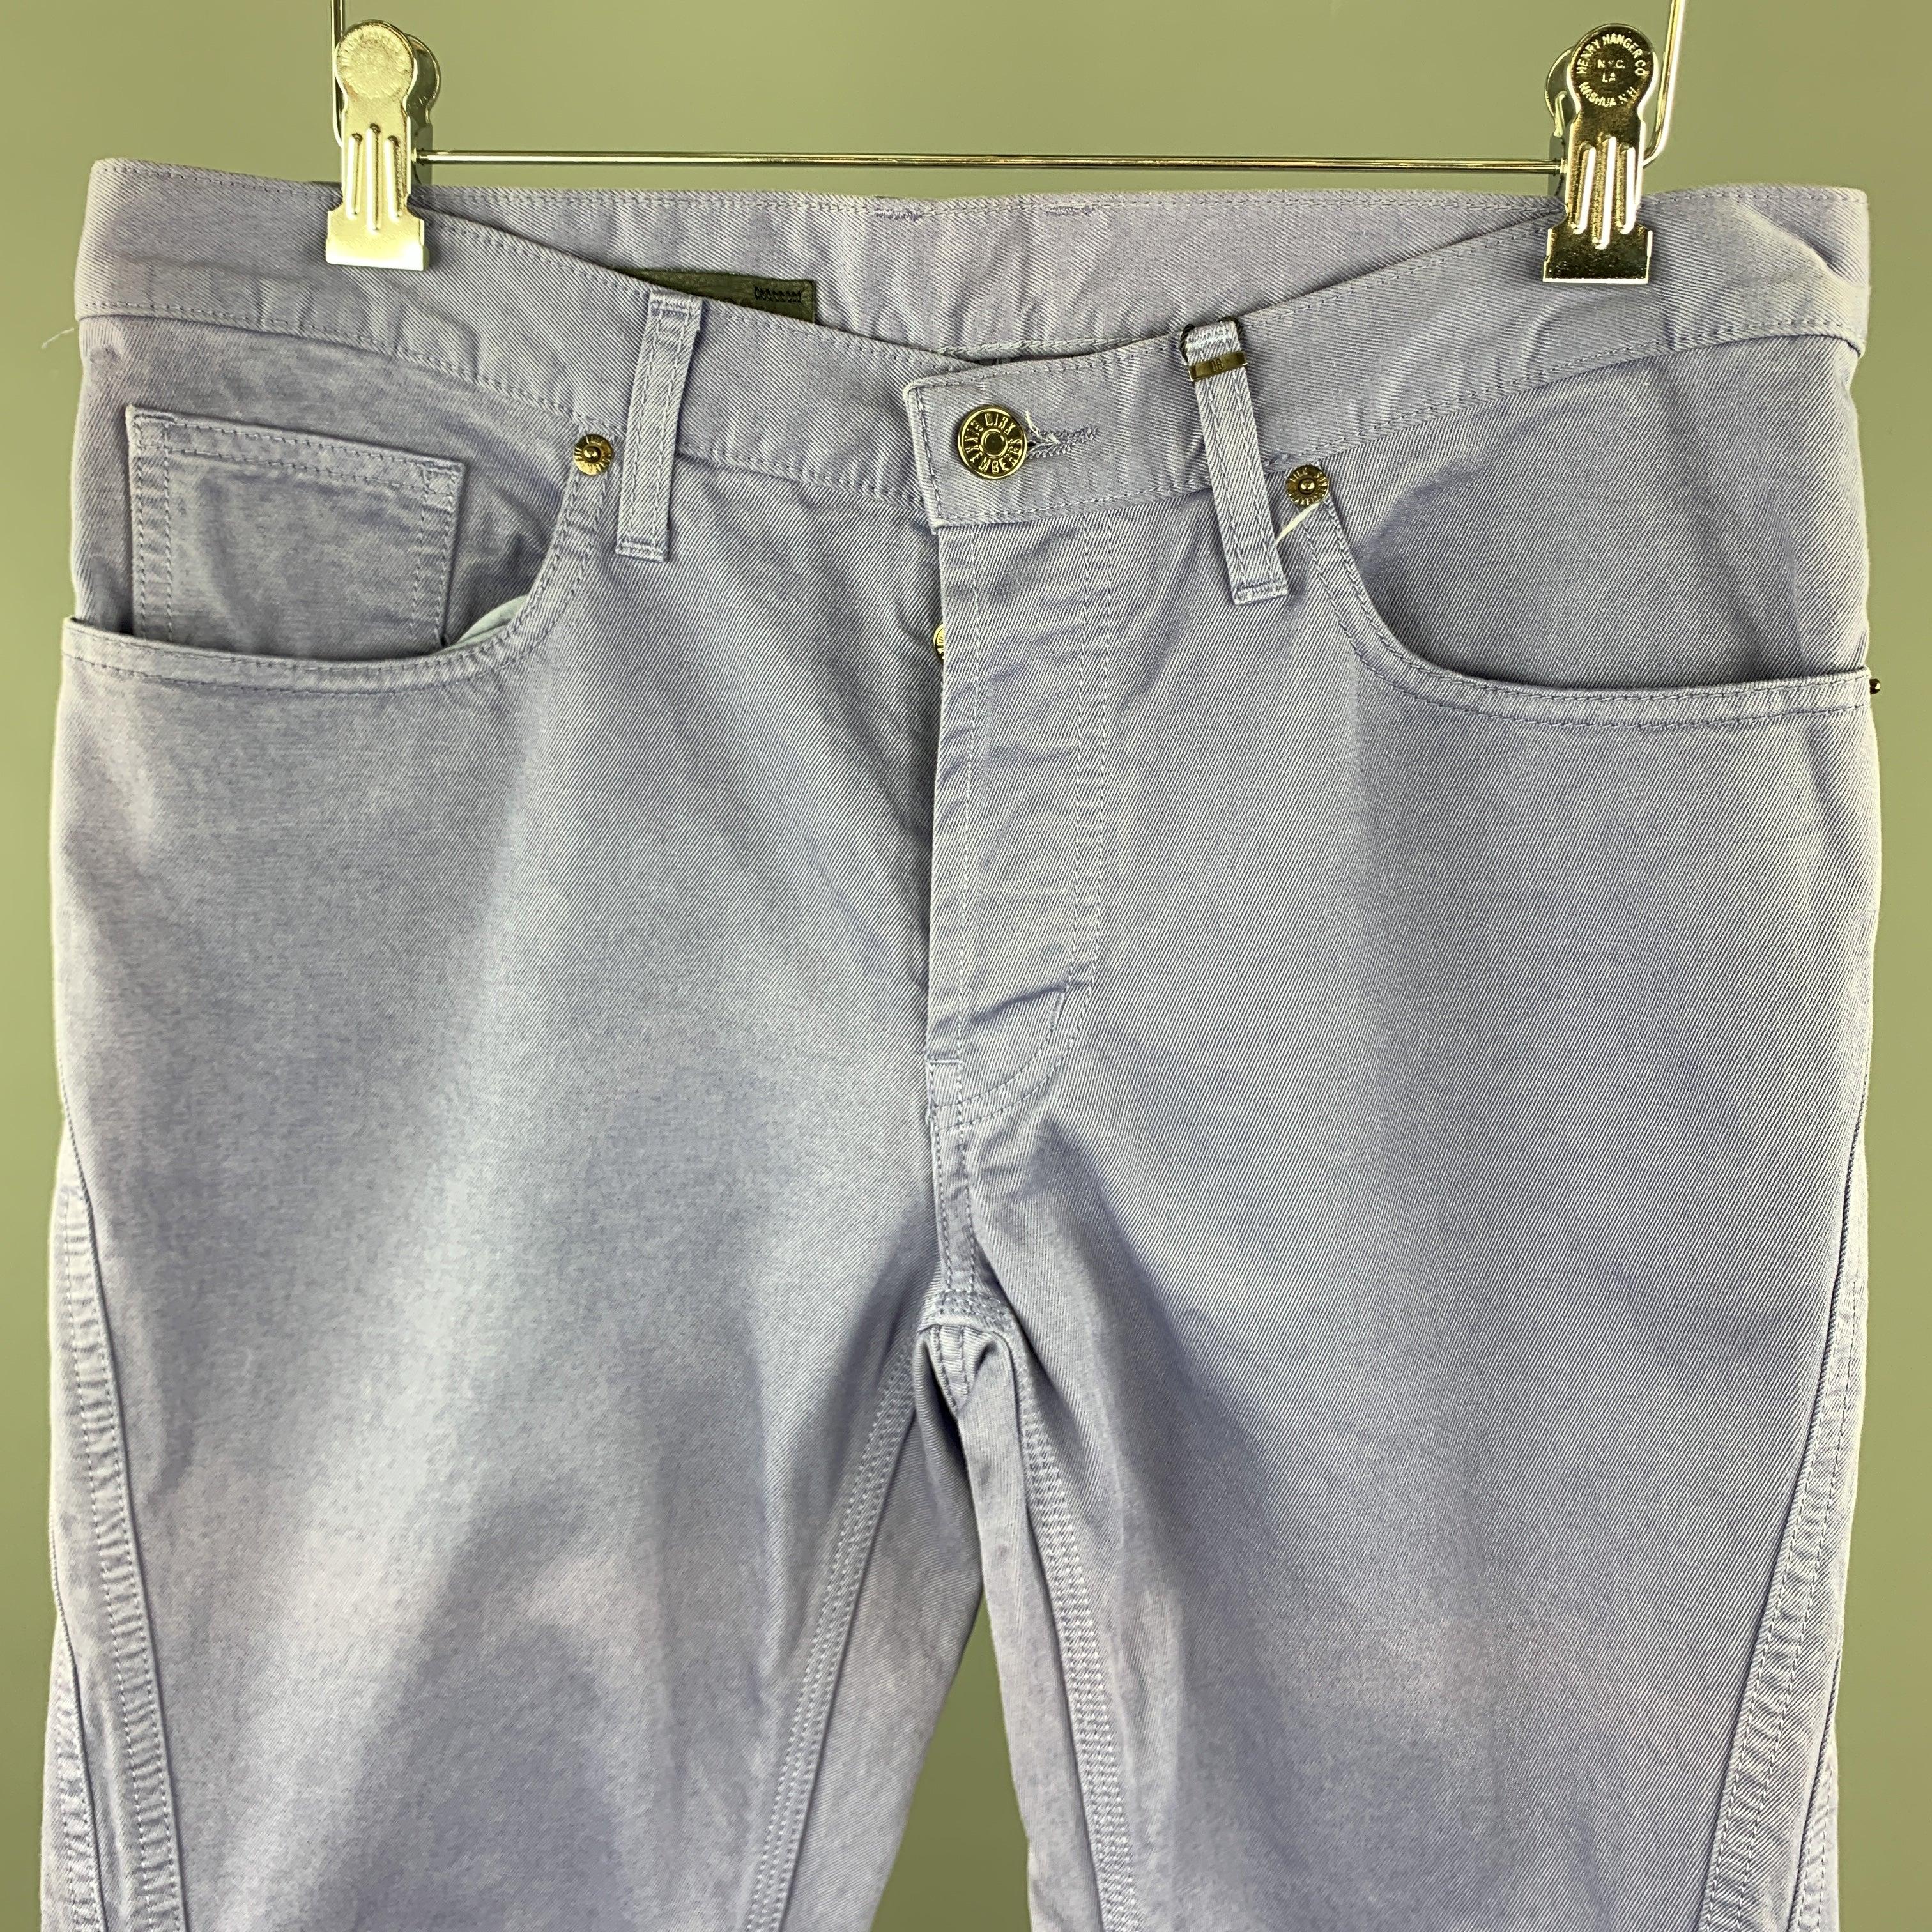 DIRK BIKKEMBERGS jeans come in light purple denim with a button fly double side seams, and silver tone back plaque. Made in Italy.New with Tags. 

Marked:   30 

Measurements: 
  Waist: 33 inches Rise:
9 inches Inseam: 28 inches 
  
  
 
Reference: